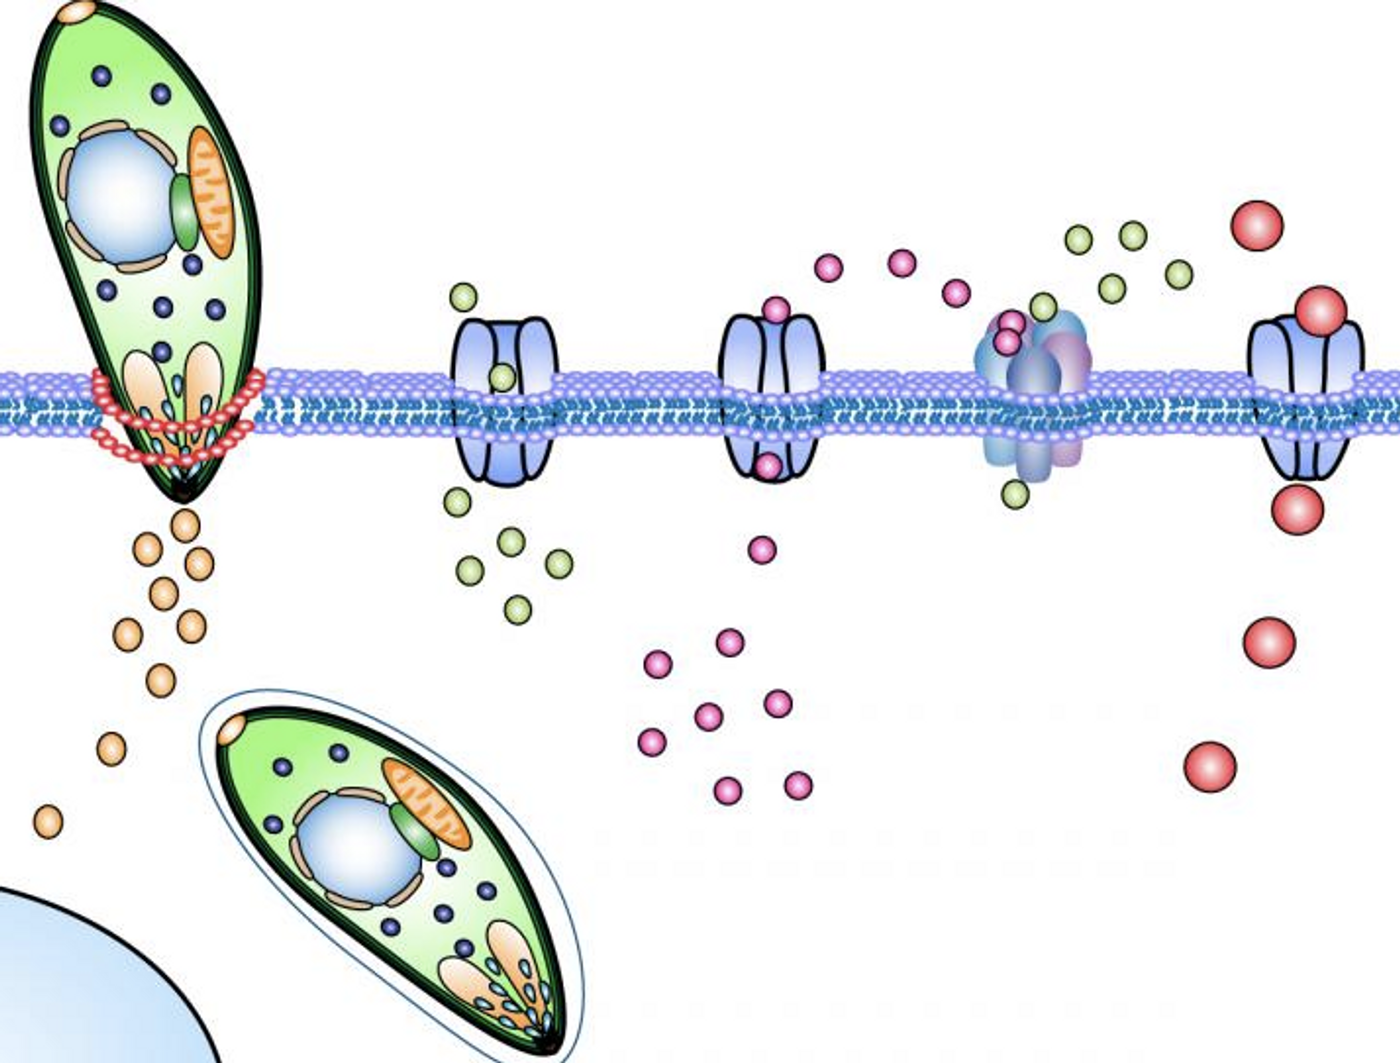 Image illustrates Toxoplasma gondii tachyzoites invading across the cell membrane of a host cell. Upon invasion, a signaling cascade is activated via chloride channels, GABA channels and calcium signaling that mediates the migratory activation of the infected immune cell. / Credit/Illustration: S. Kanatani